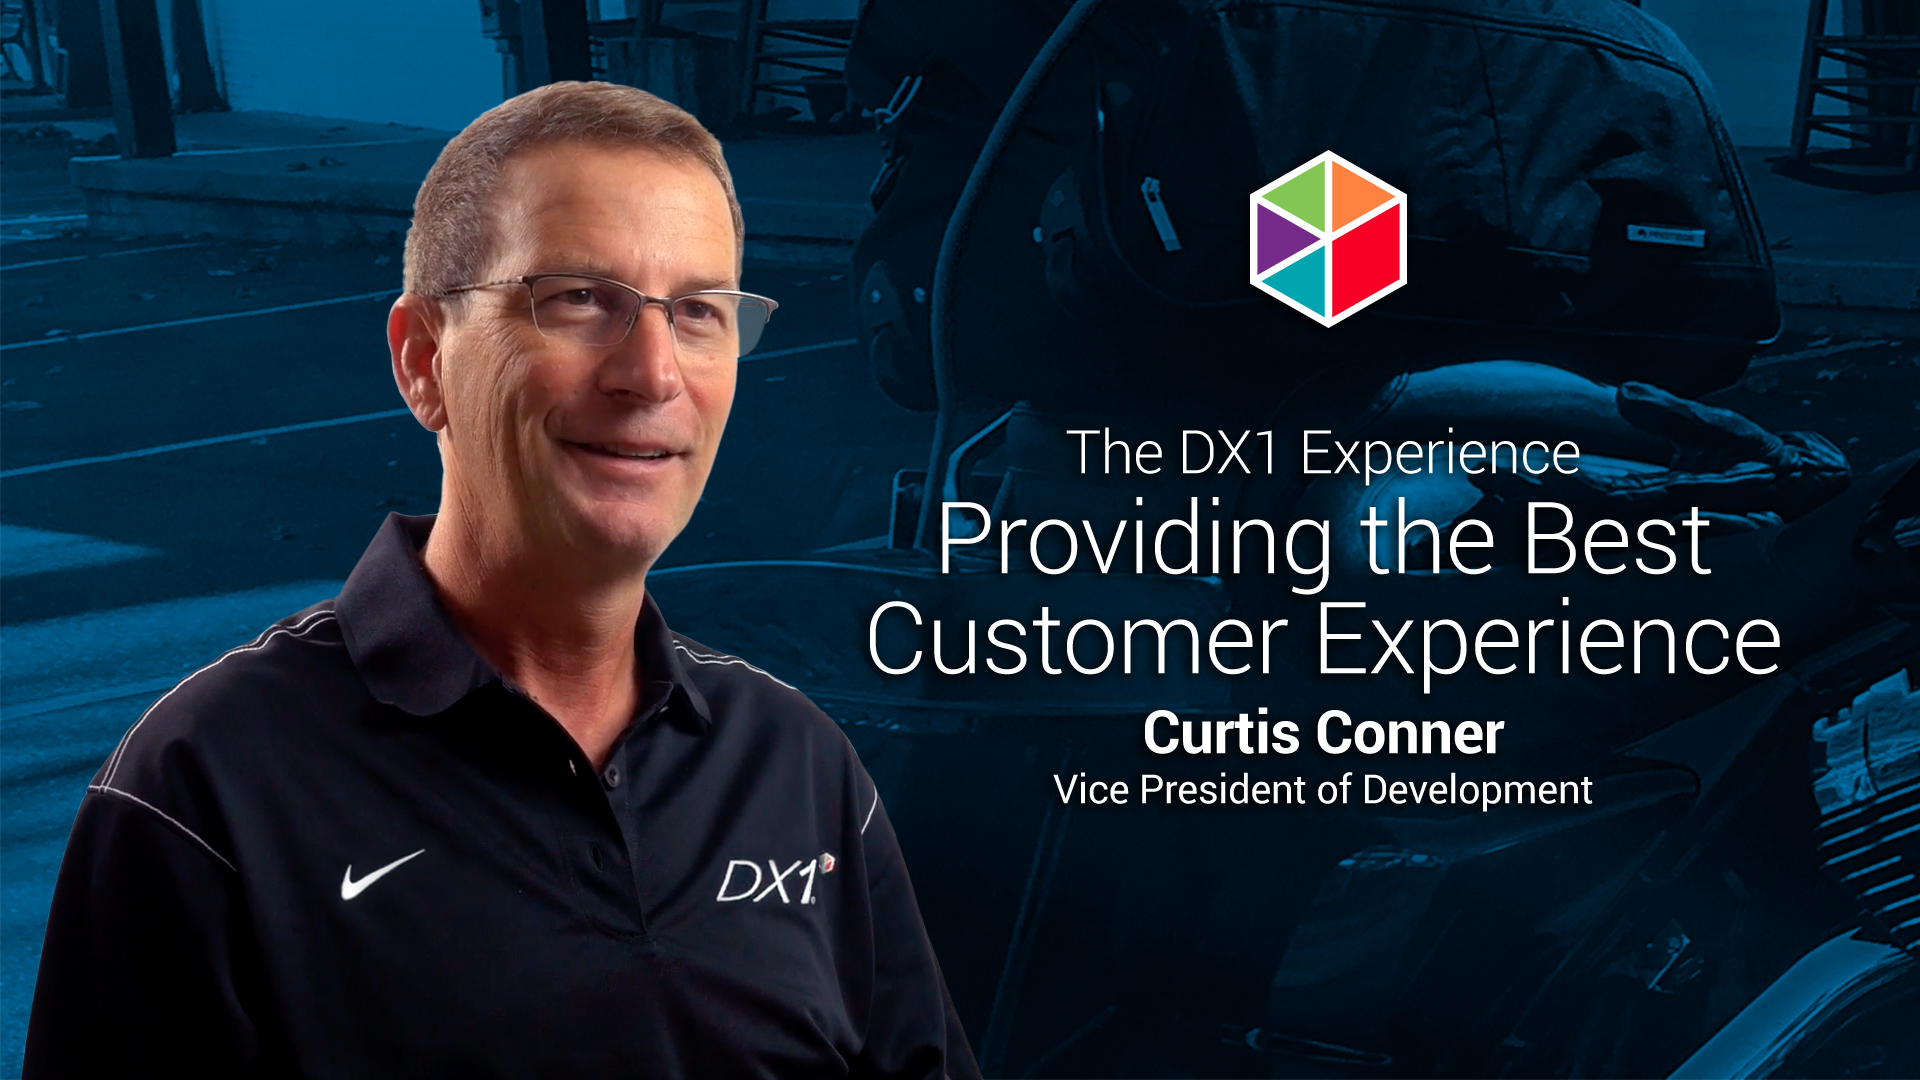 The DX1 Experience: Providing the Best Customer Experience